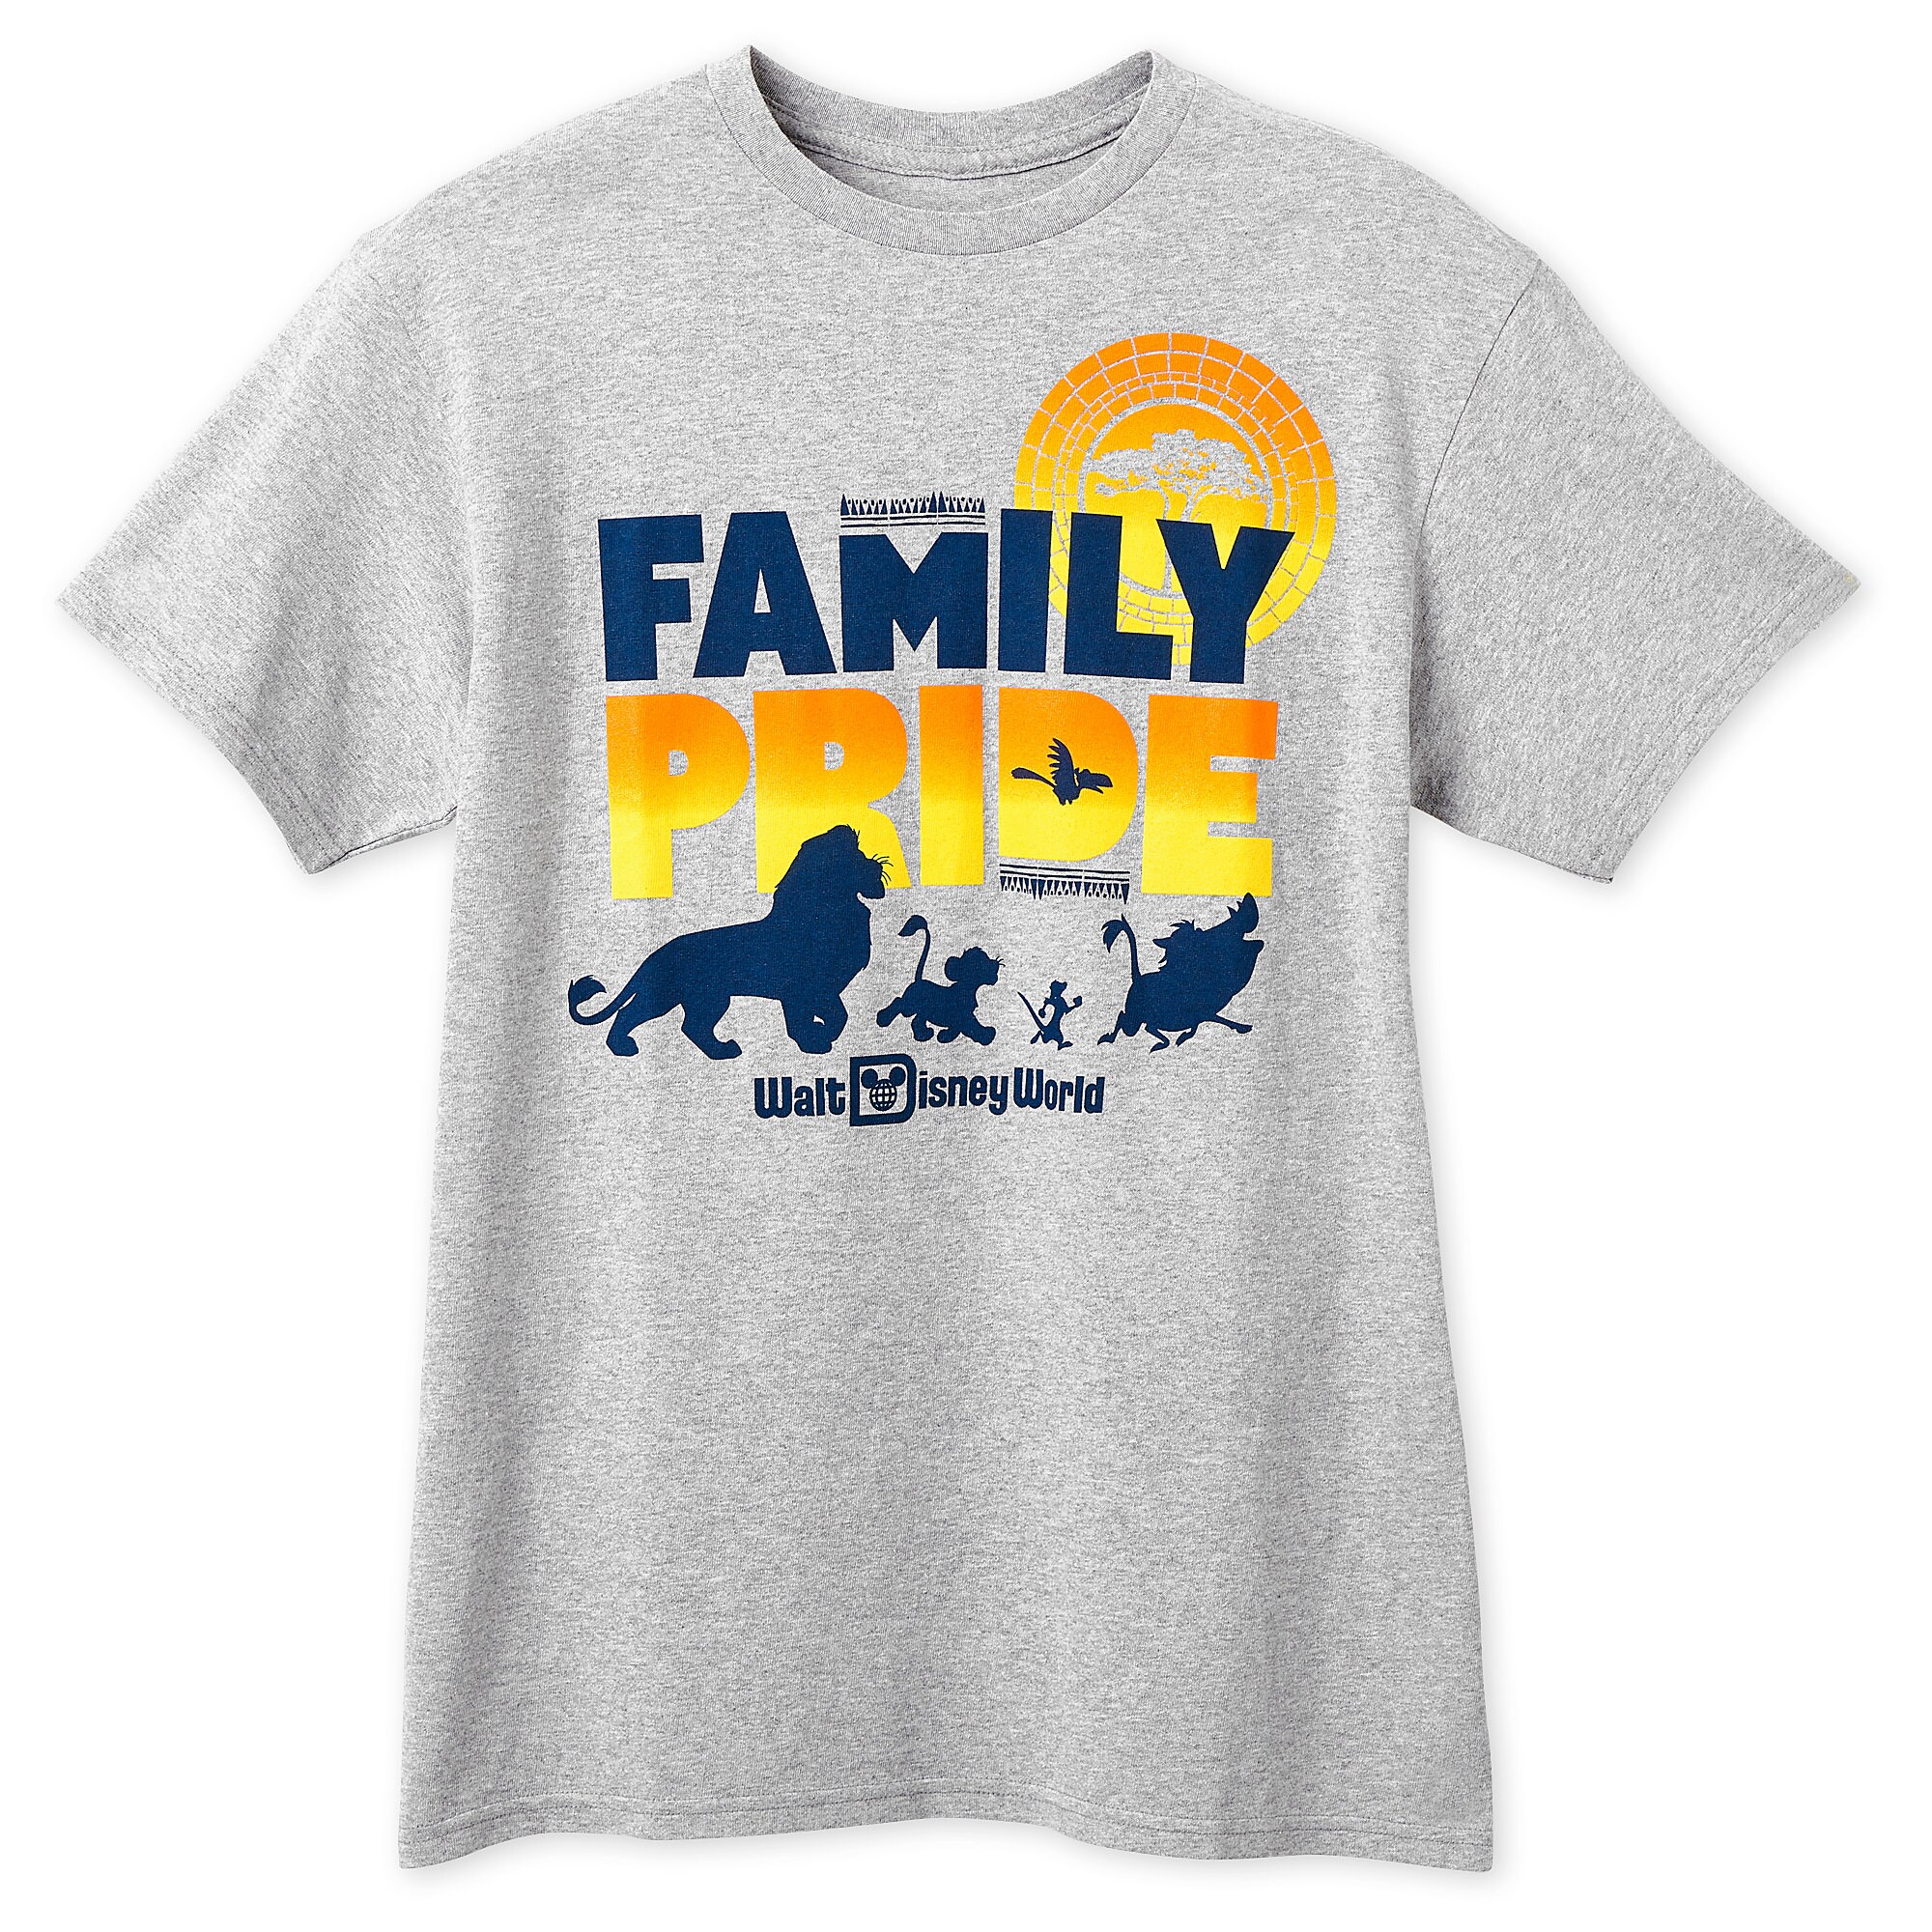 The Lion King Family Pride T-Shirt for Adults - Walt Disney World is here now â Dis Merchandise News